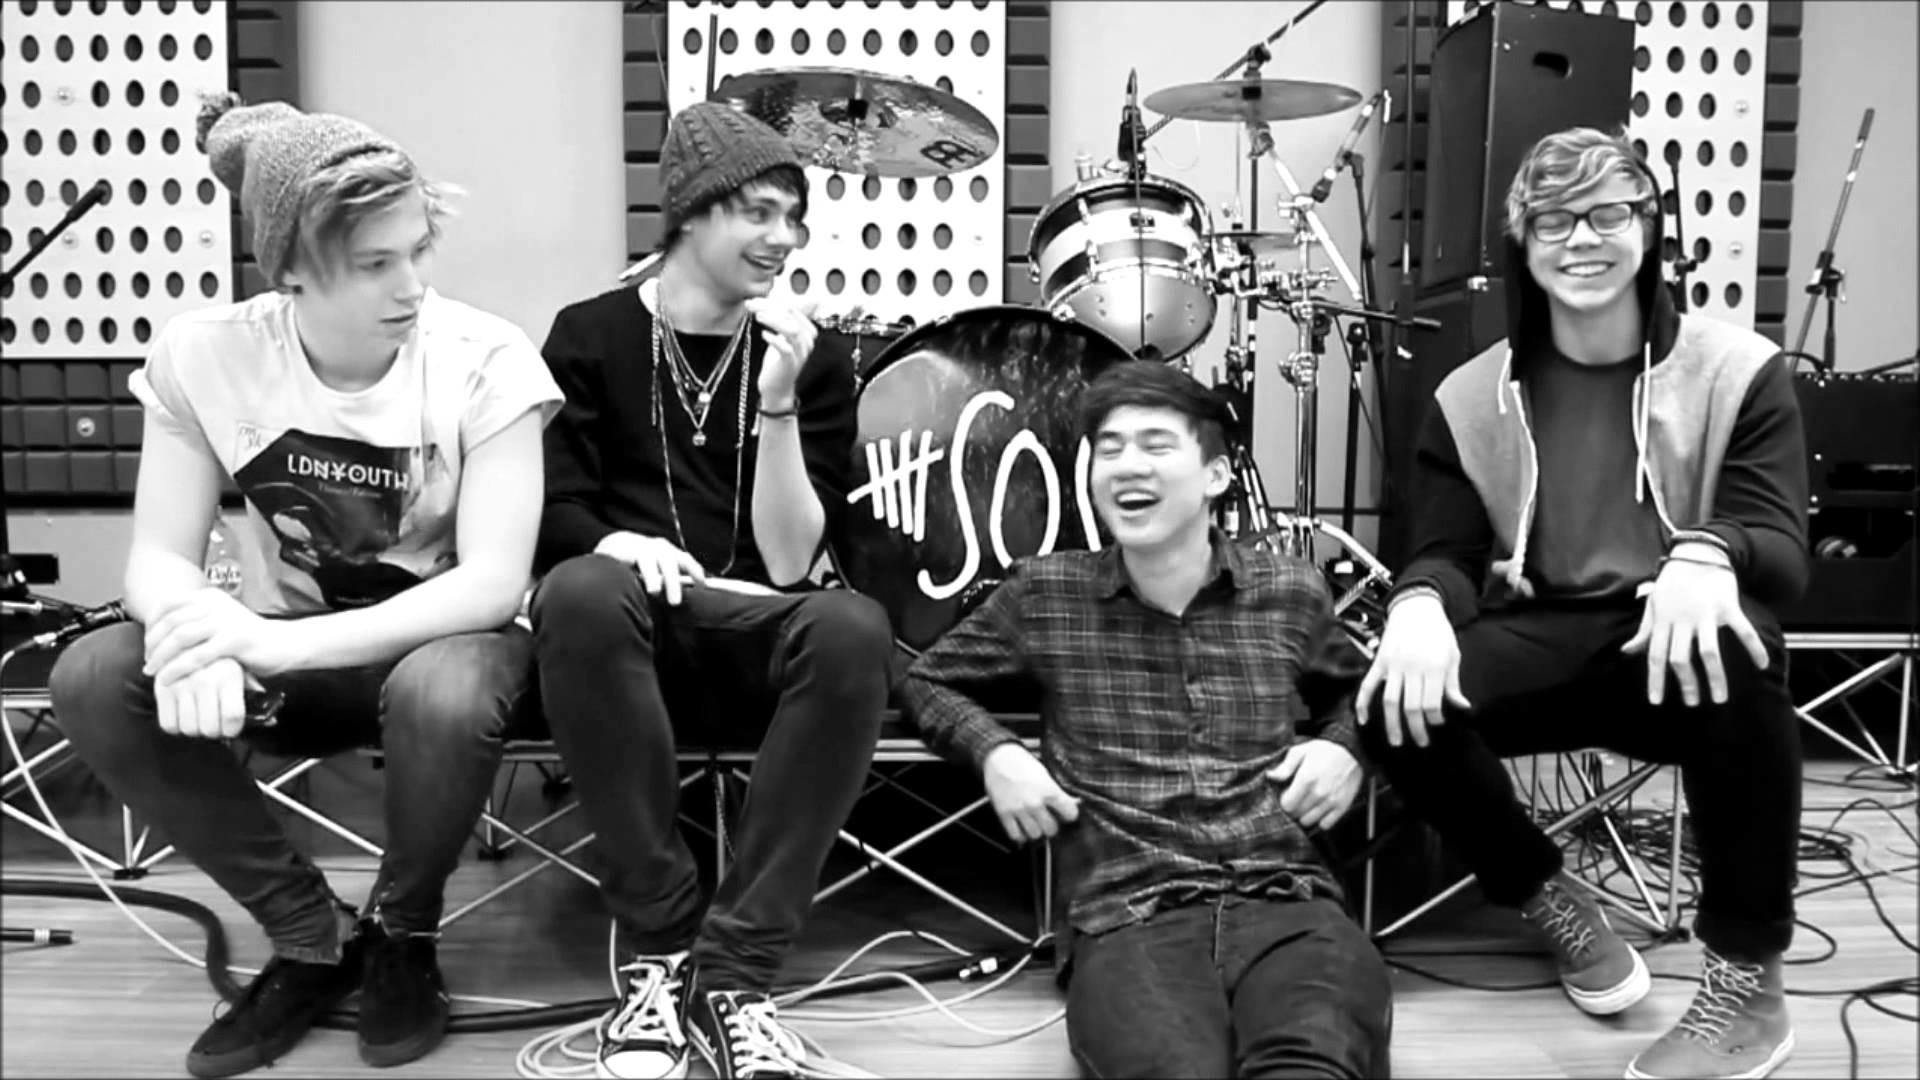 5 Seconds of Summer – You Found Me